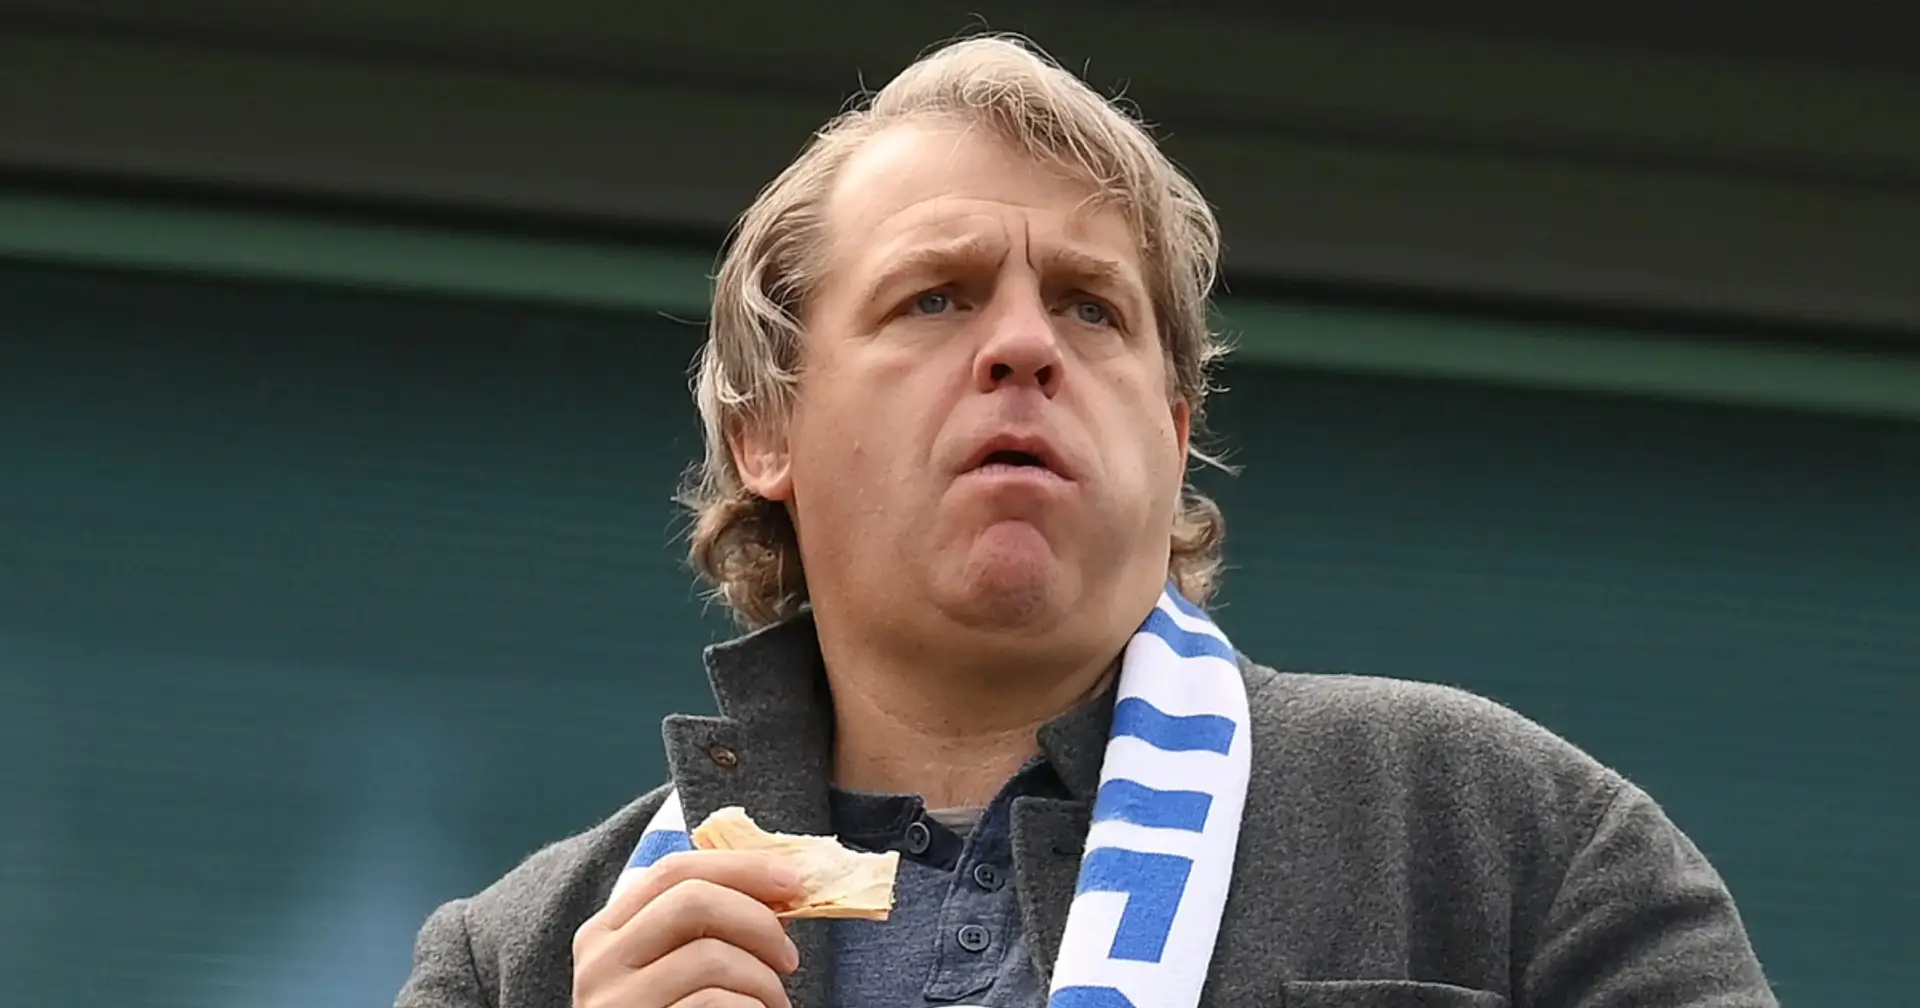 Todd Boehly reportedly to be replaced as Chelsea chairman, date revealed